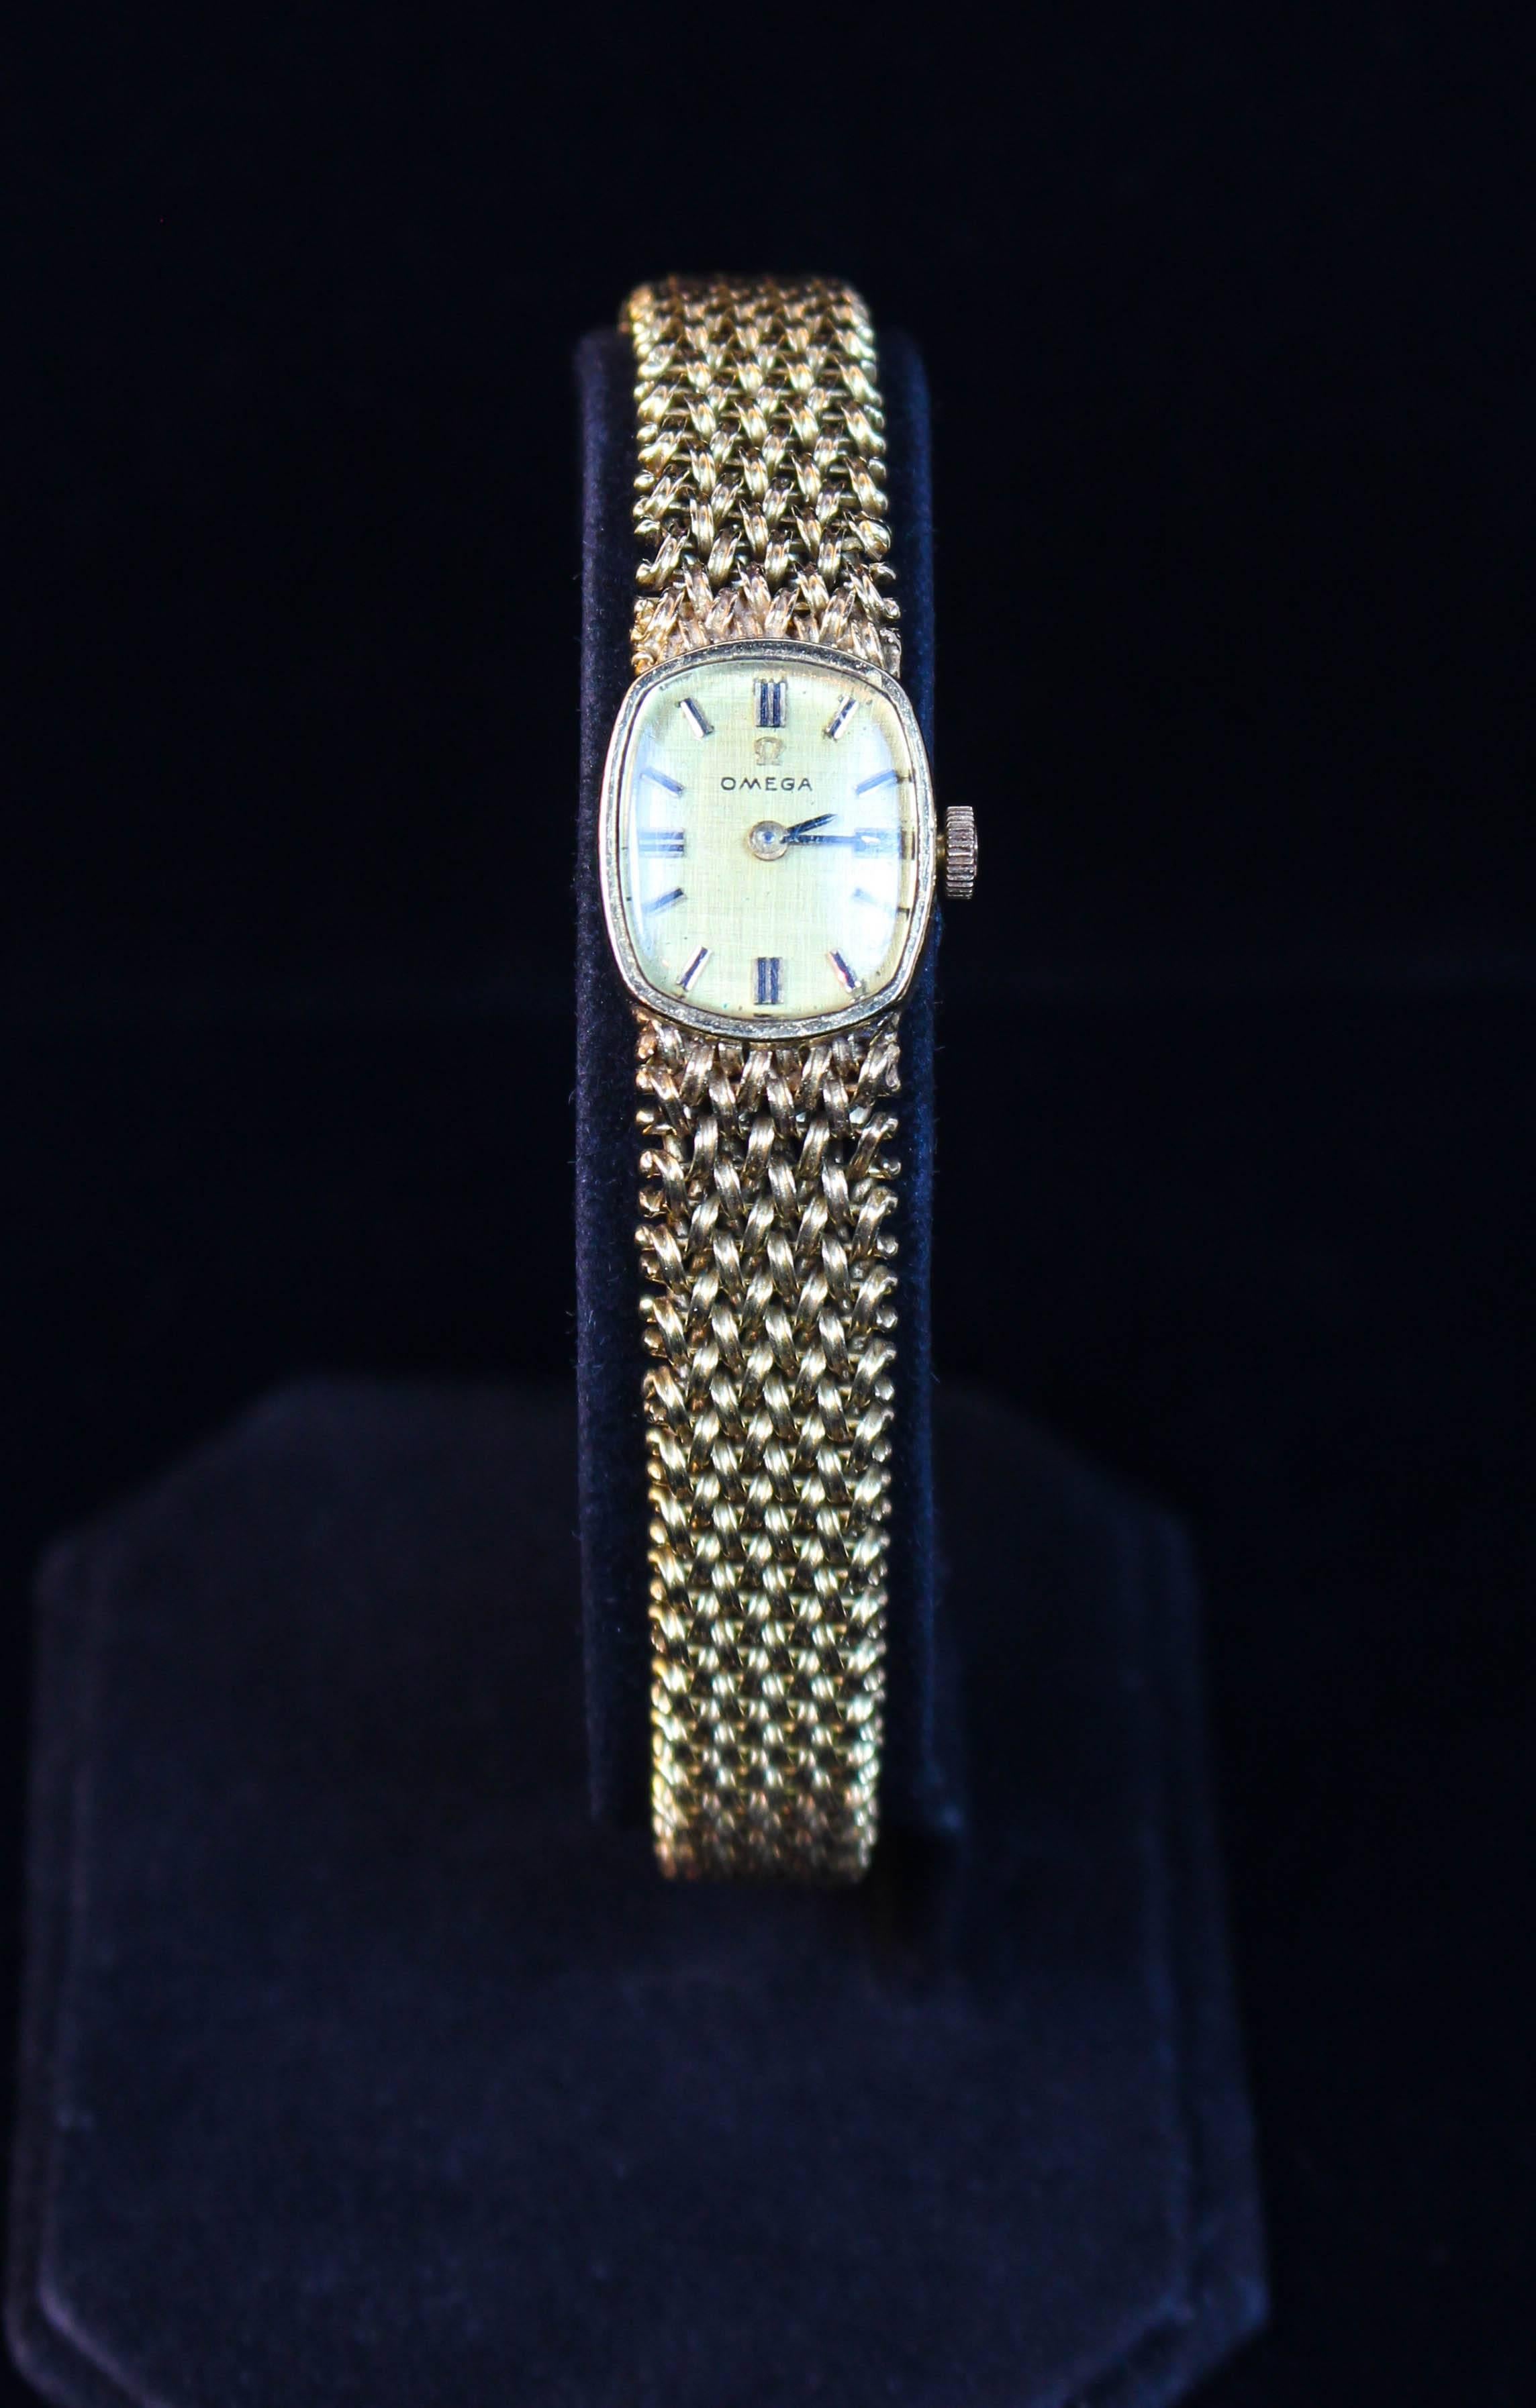 This Omega watch is composed of 14 KT yellow gold. Features woven patterned straps. A beautiful classic design, with an adjustable closure. In excellent condition.
Vintage Circa 1978

Please feel free to ask any questions you may have, we are happy